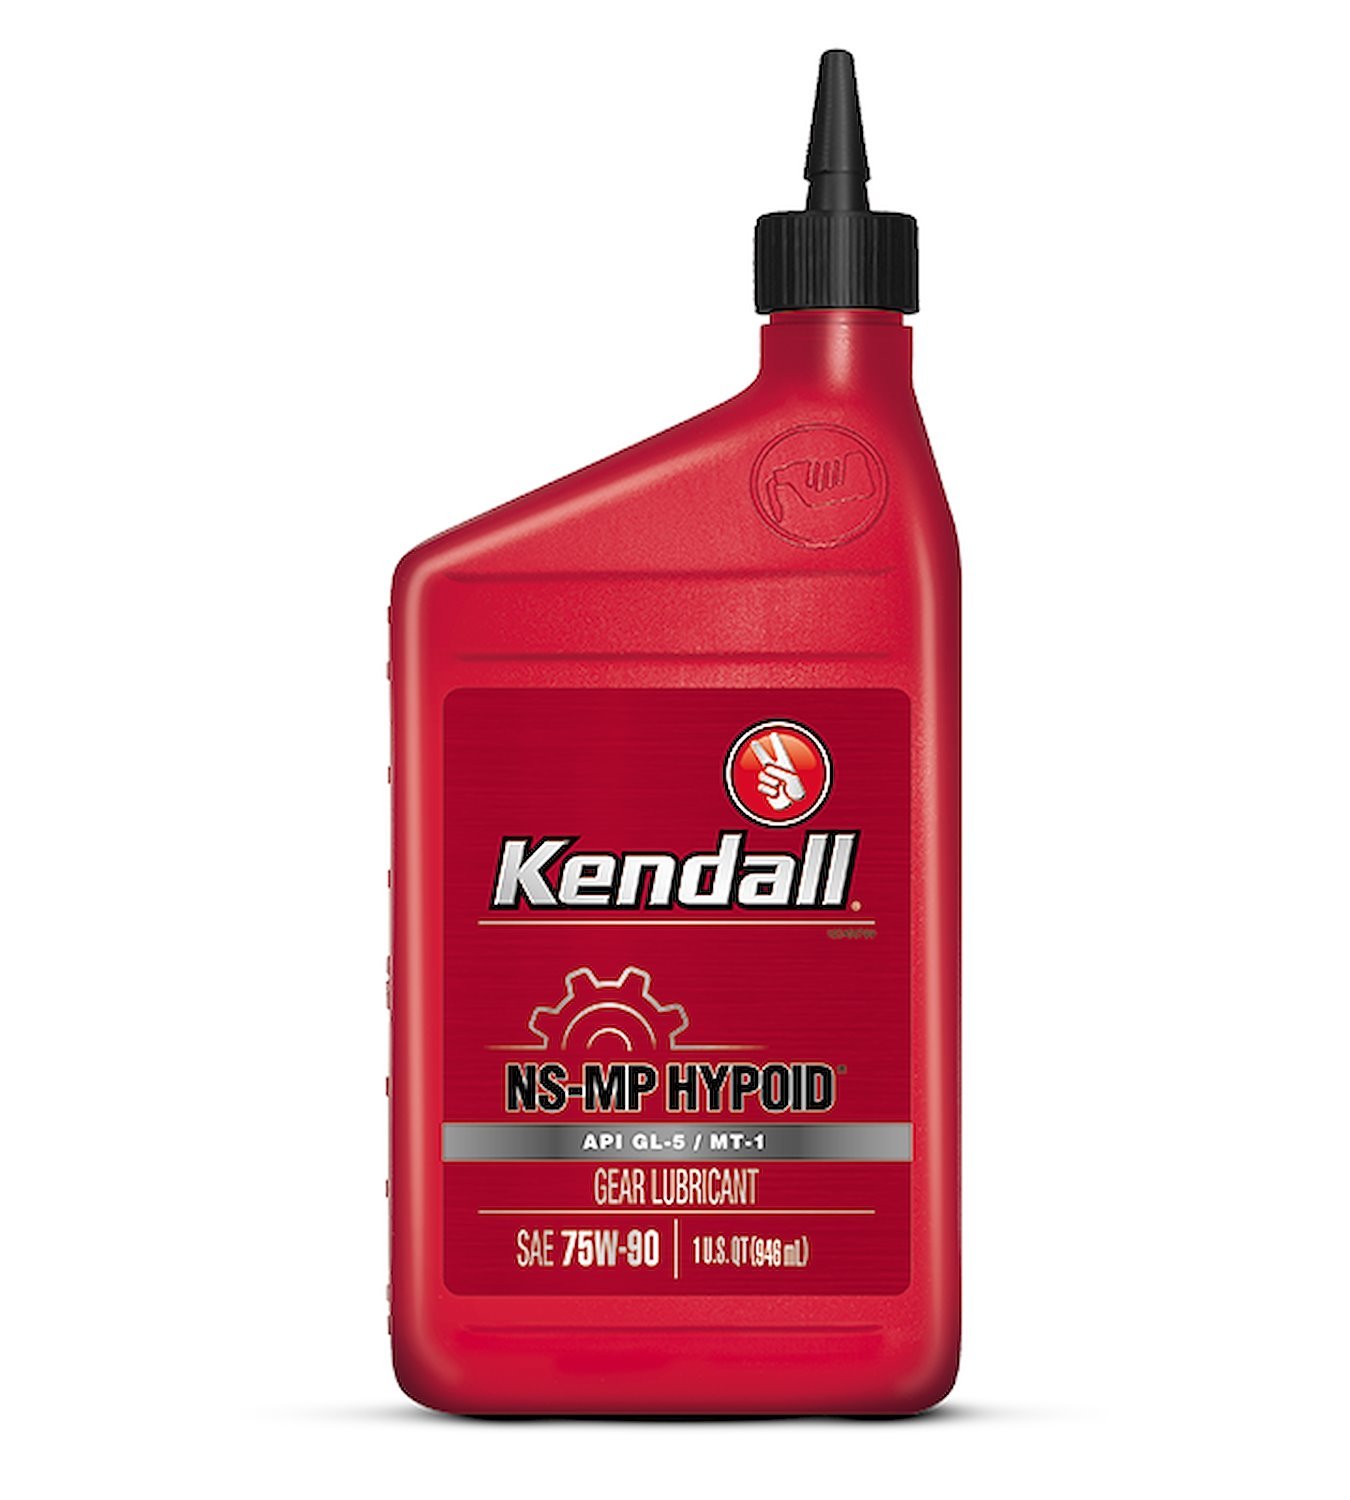 Kendall 1073845 NS-MP Hypoid Gear Lube - 80W-90